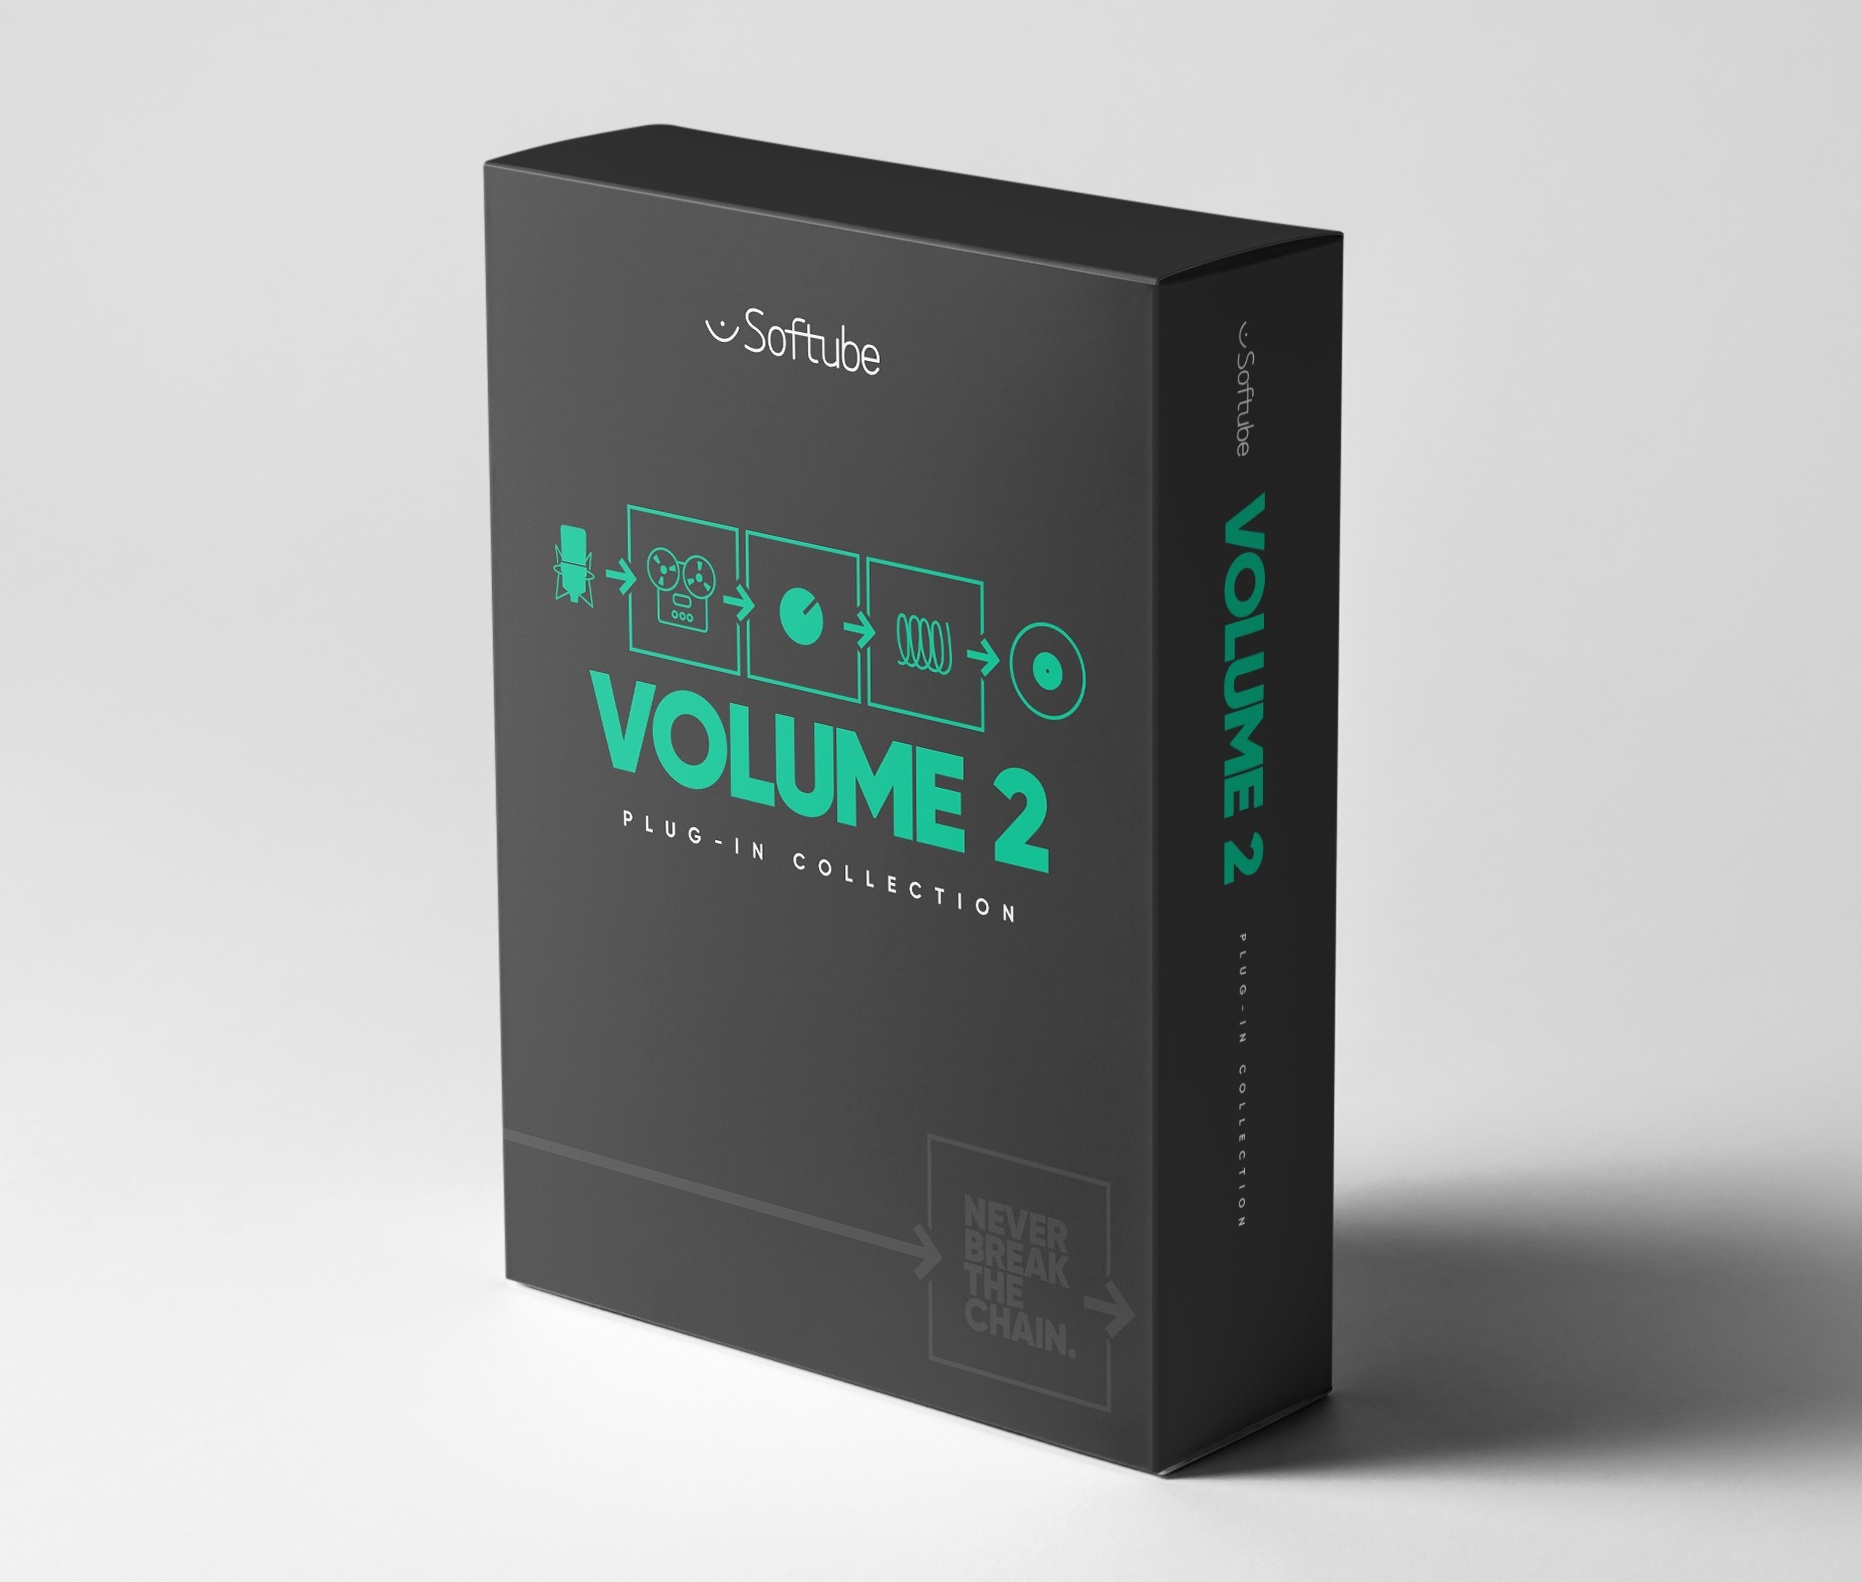 New Software Review: Volume 2 by Softube